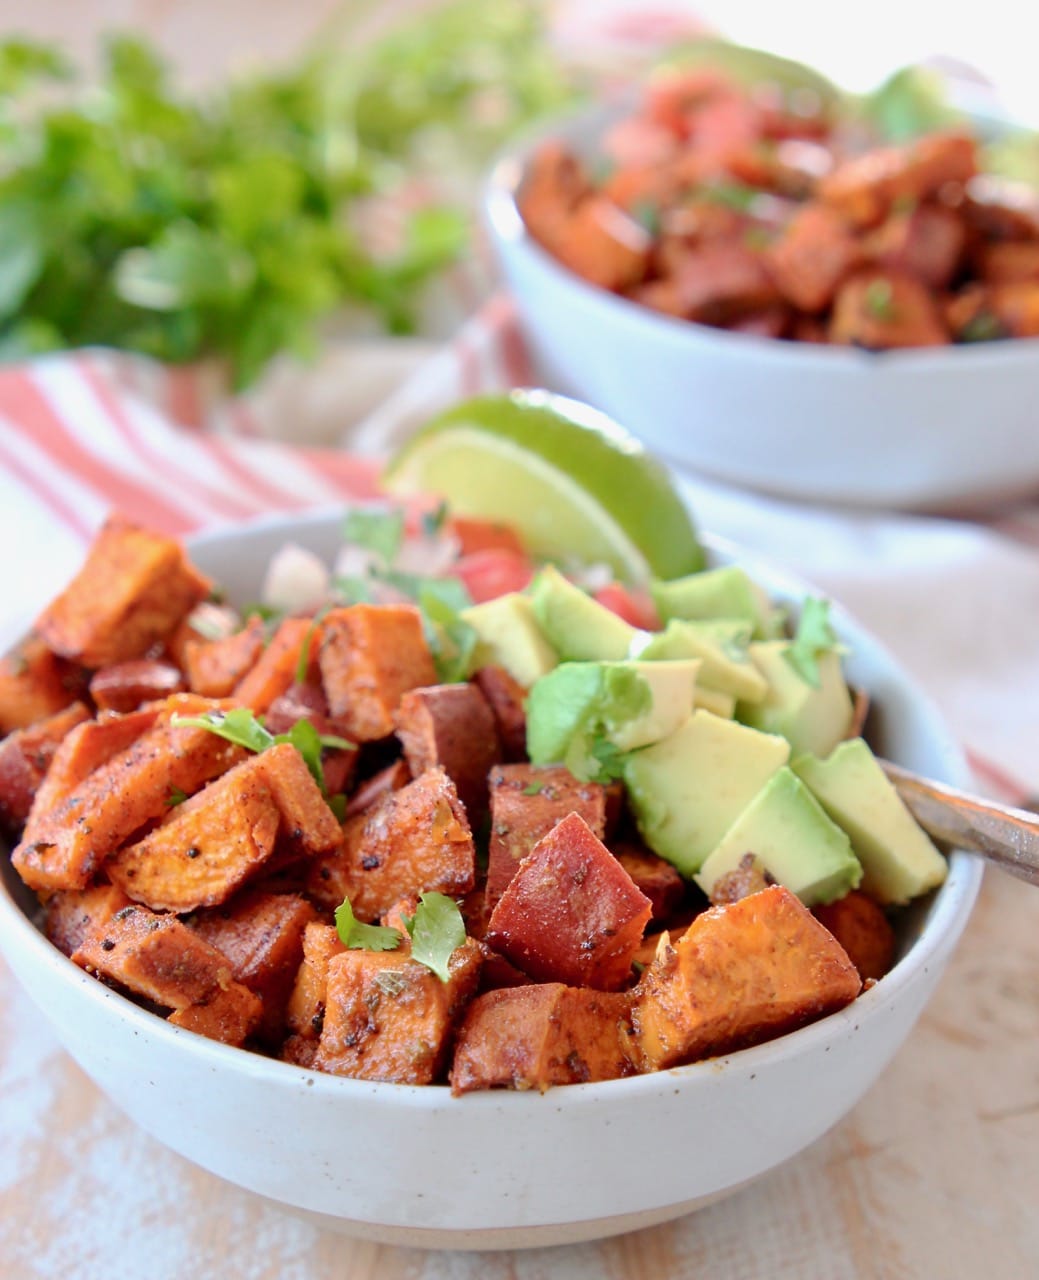 Diced roasted sweet potatoes and diced avocado in quinoa bowl with lime wedge and fork, with orange and white striped towel underneath and cilantro in background